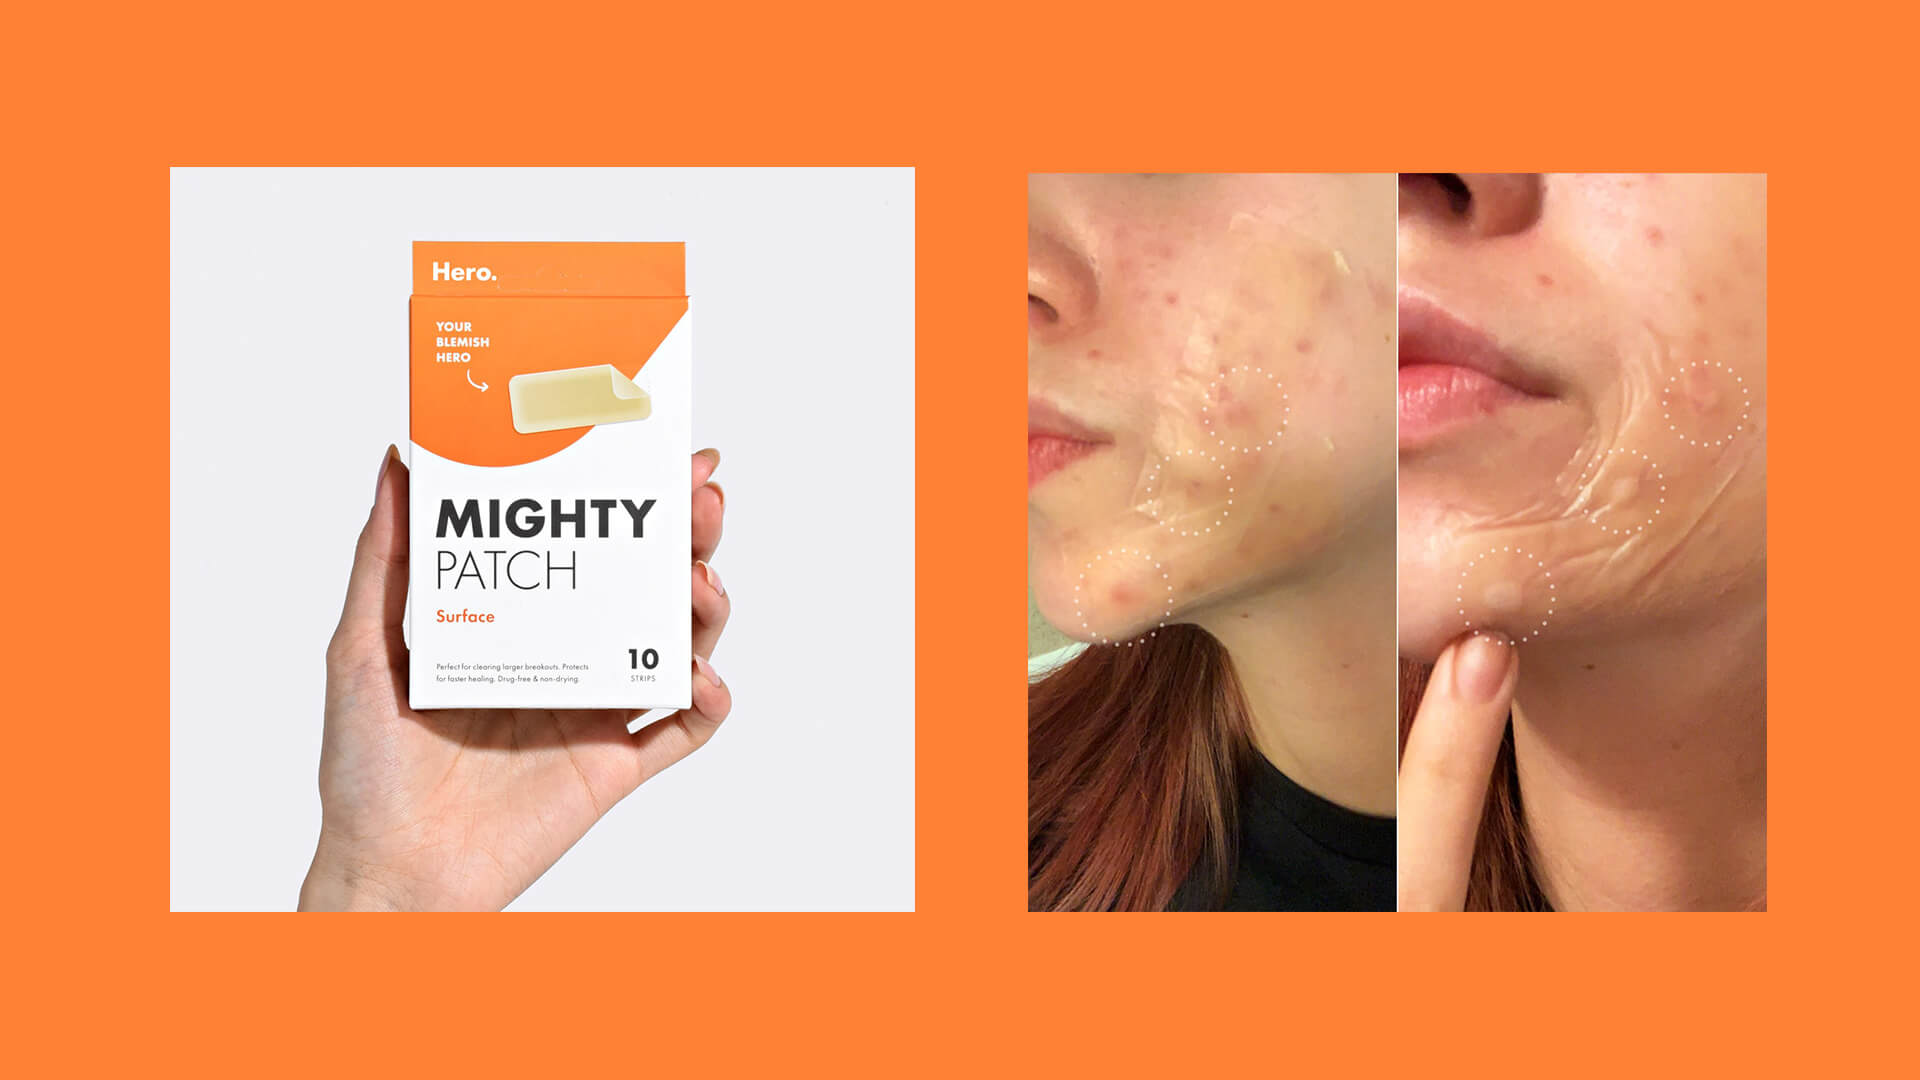 Skincare brand by HERO - Before and after results photo content